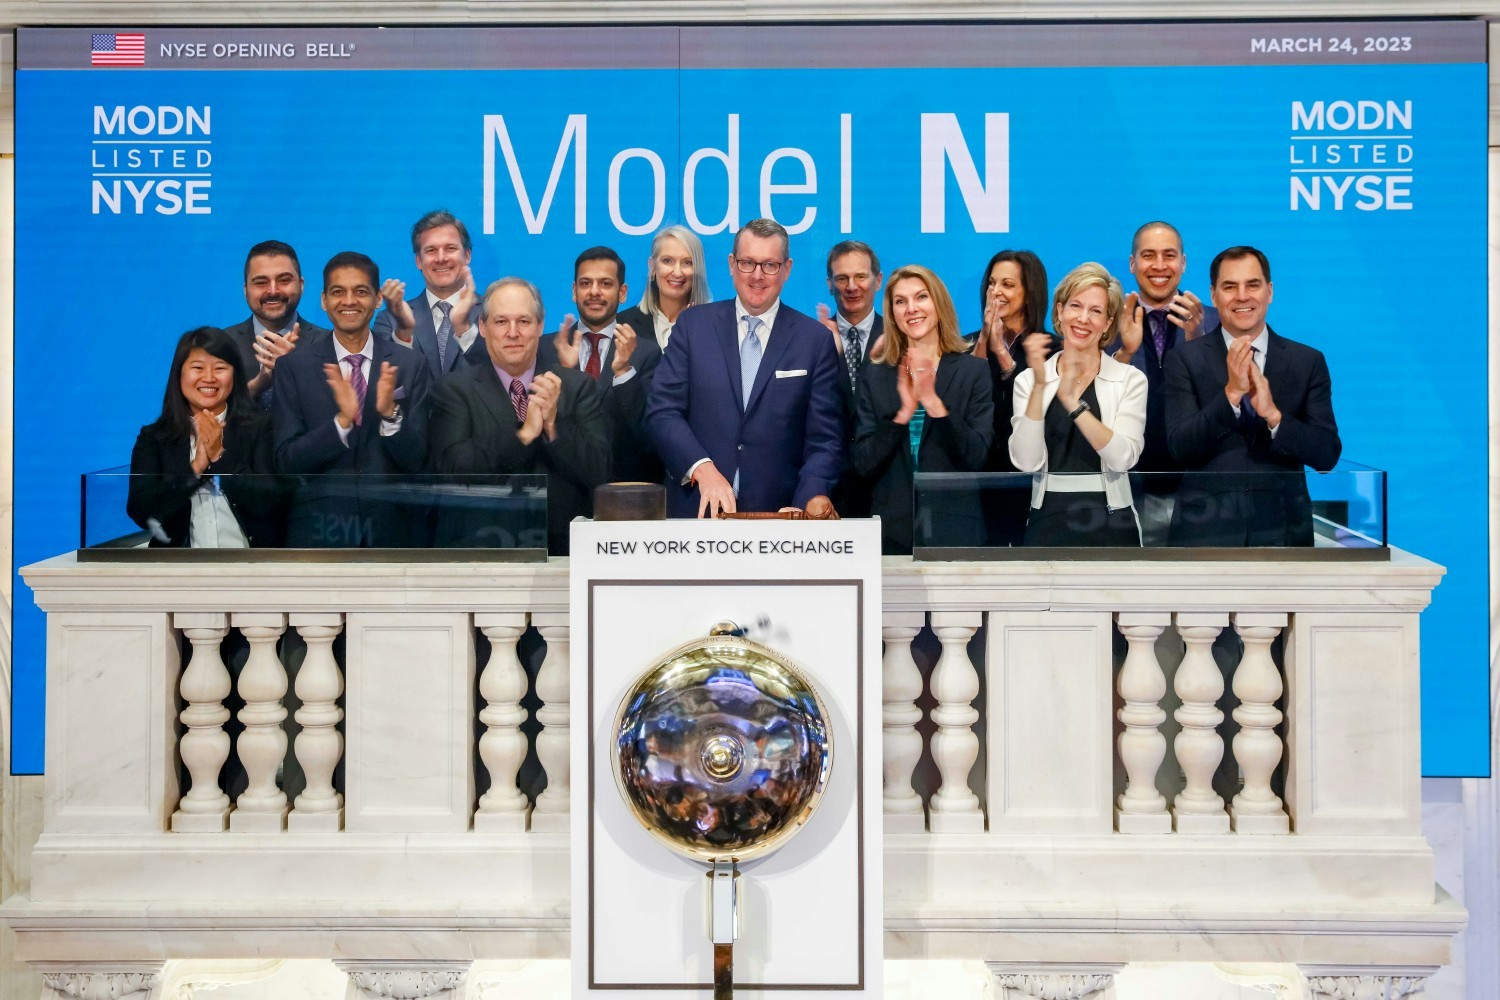 Honored our 10th anniversary as a publicly traded company by ringing the NYSE opening bell. Photo courtesy of the NYSE.